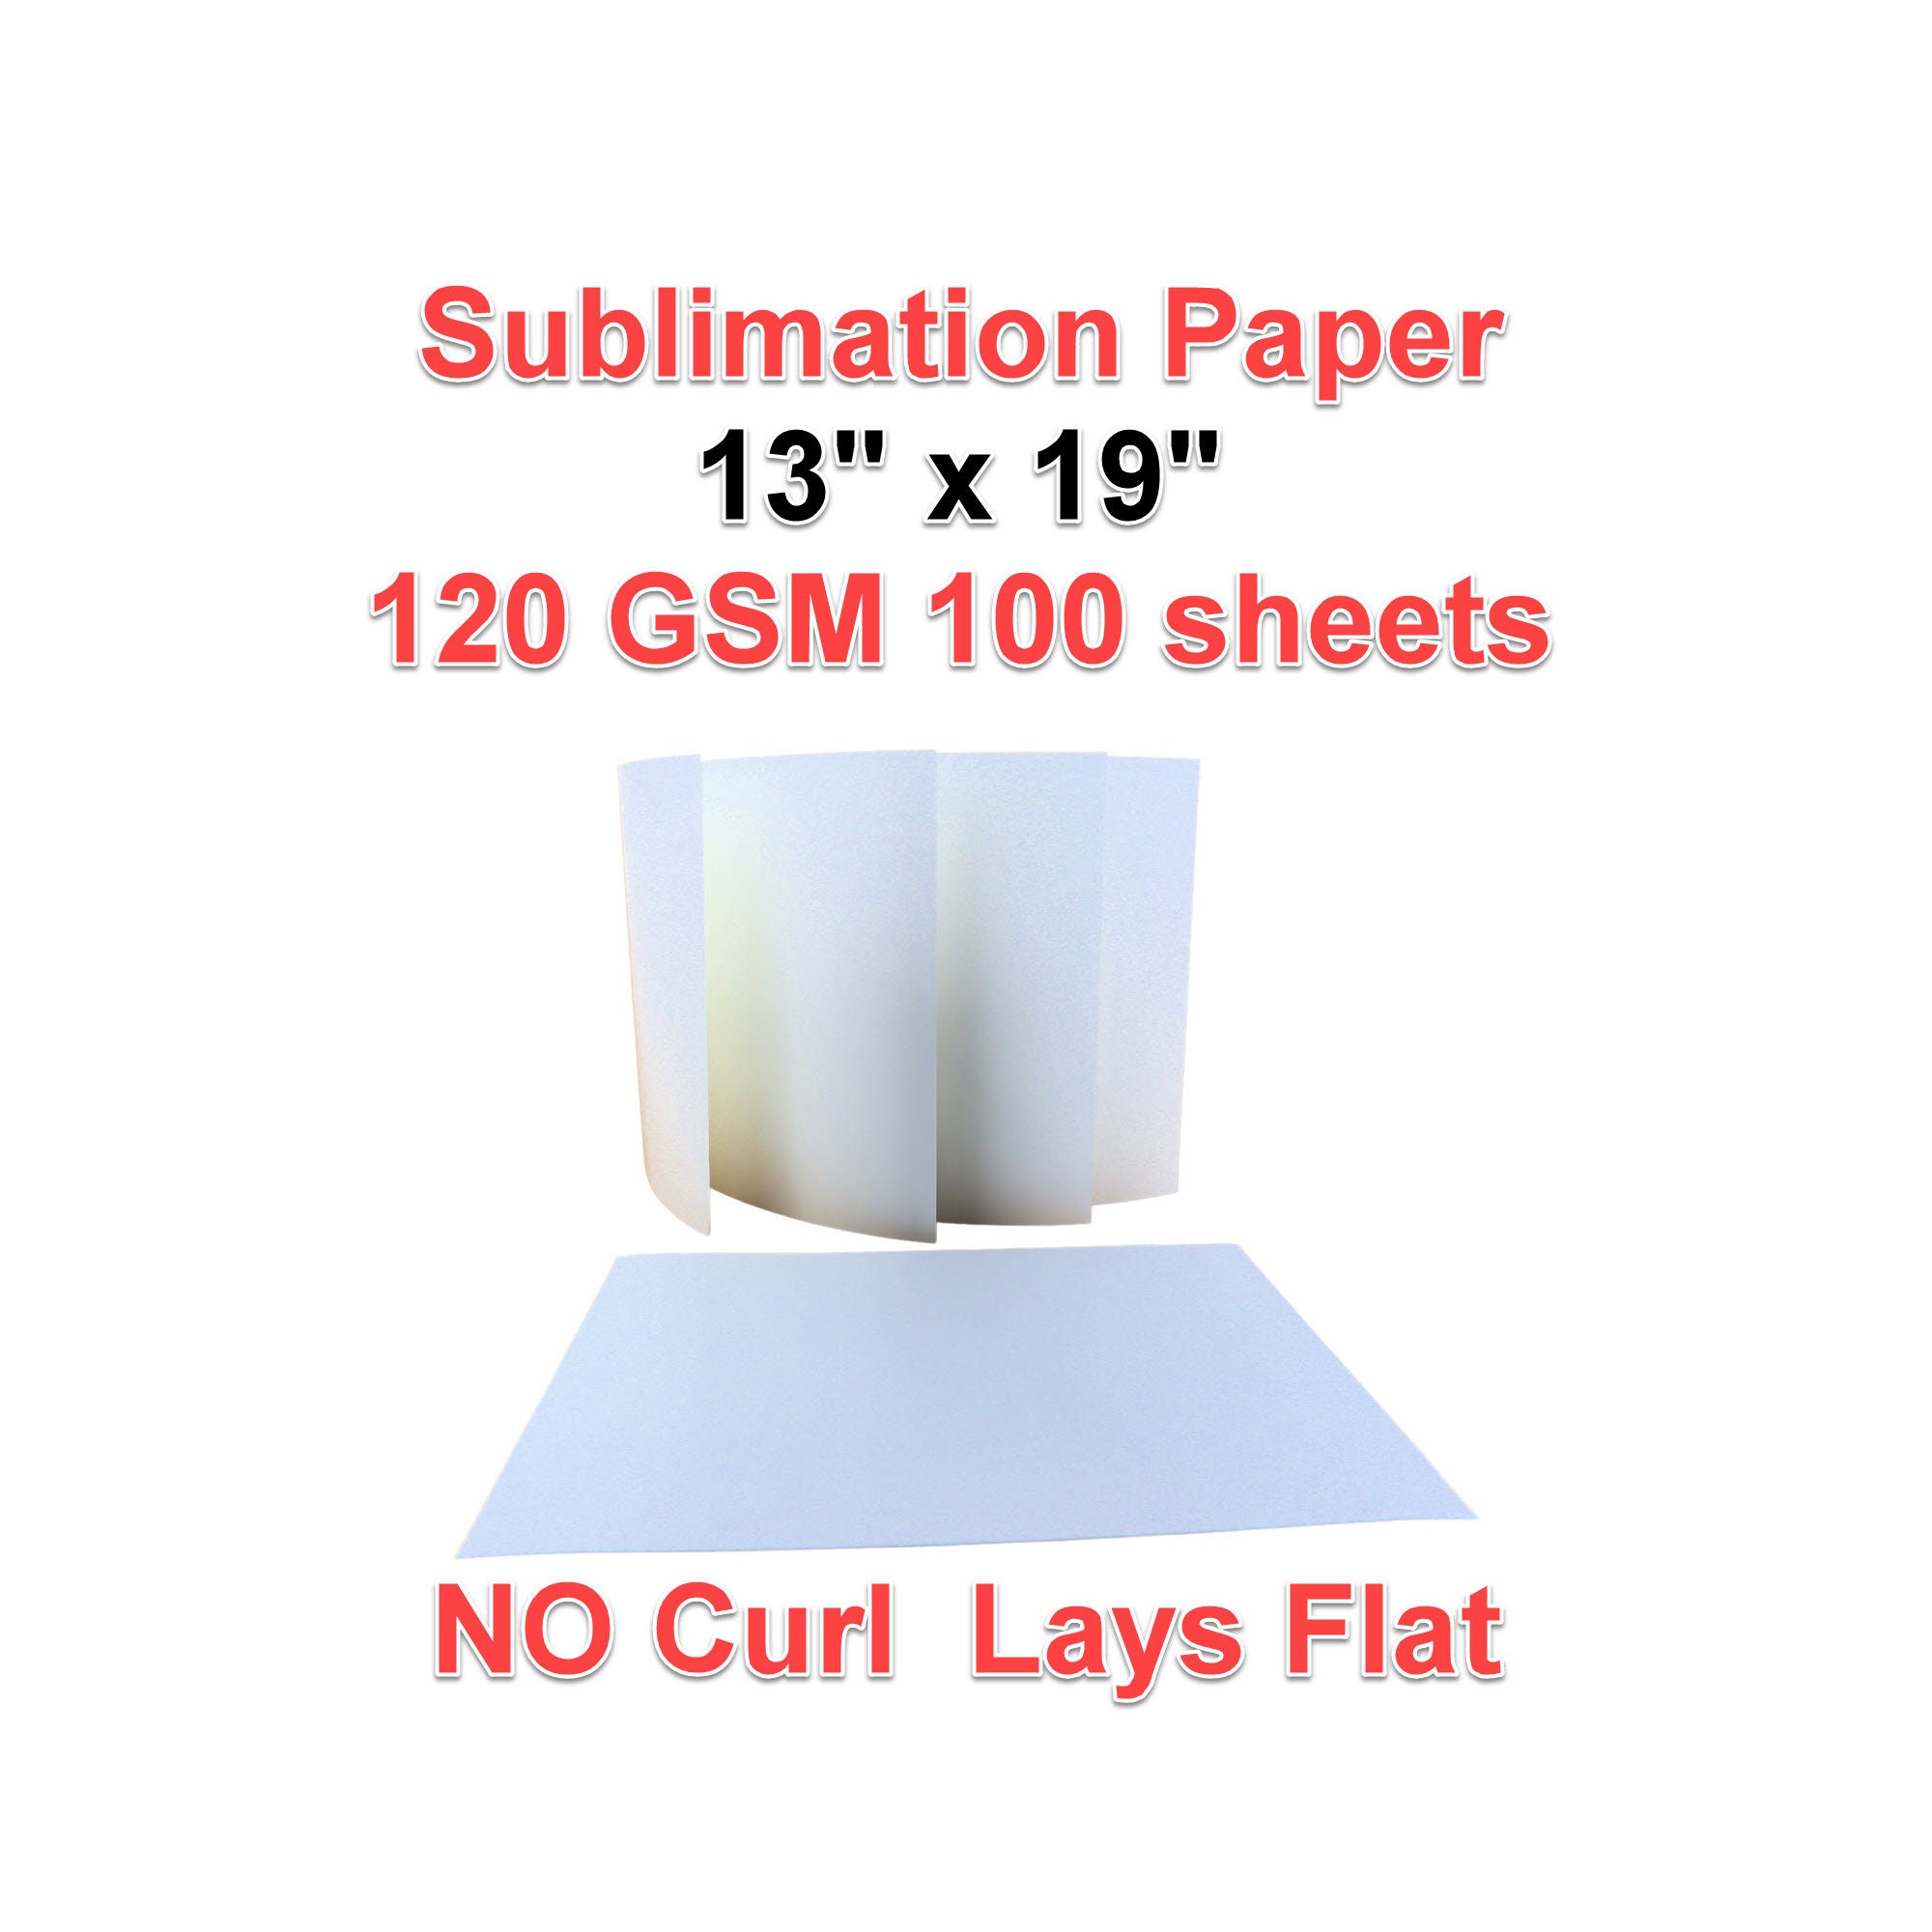 A-sub Sublimation Paper Heat Transfer 110Sheets 11x17 Inches Tabloid Size Compatible with Inkjet Printer 120gsm